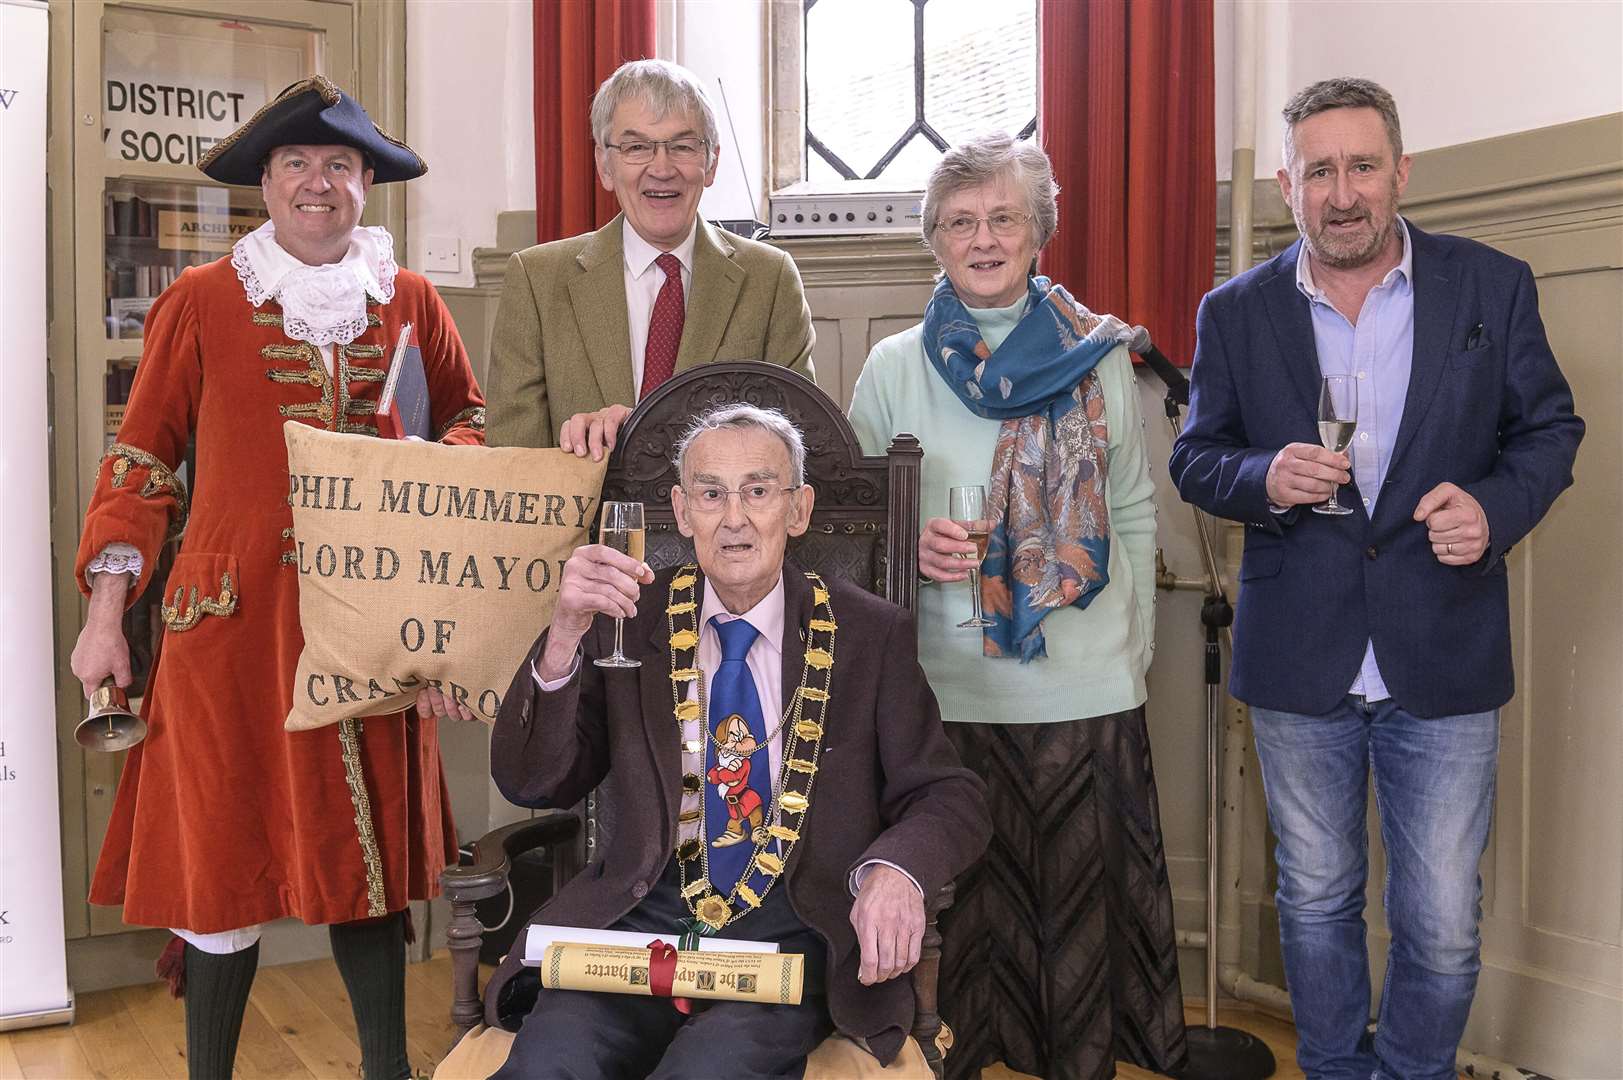 Phil Mummery at his Mayor-making: From left town crier Andy Fairweather, parish council chairman Kim Fletcher, Val Mummery and Stuart Cleary of the Cranbrook Apple Fair committee